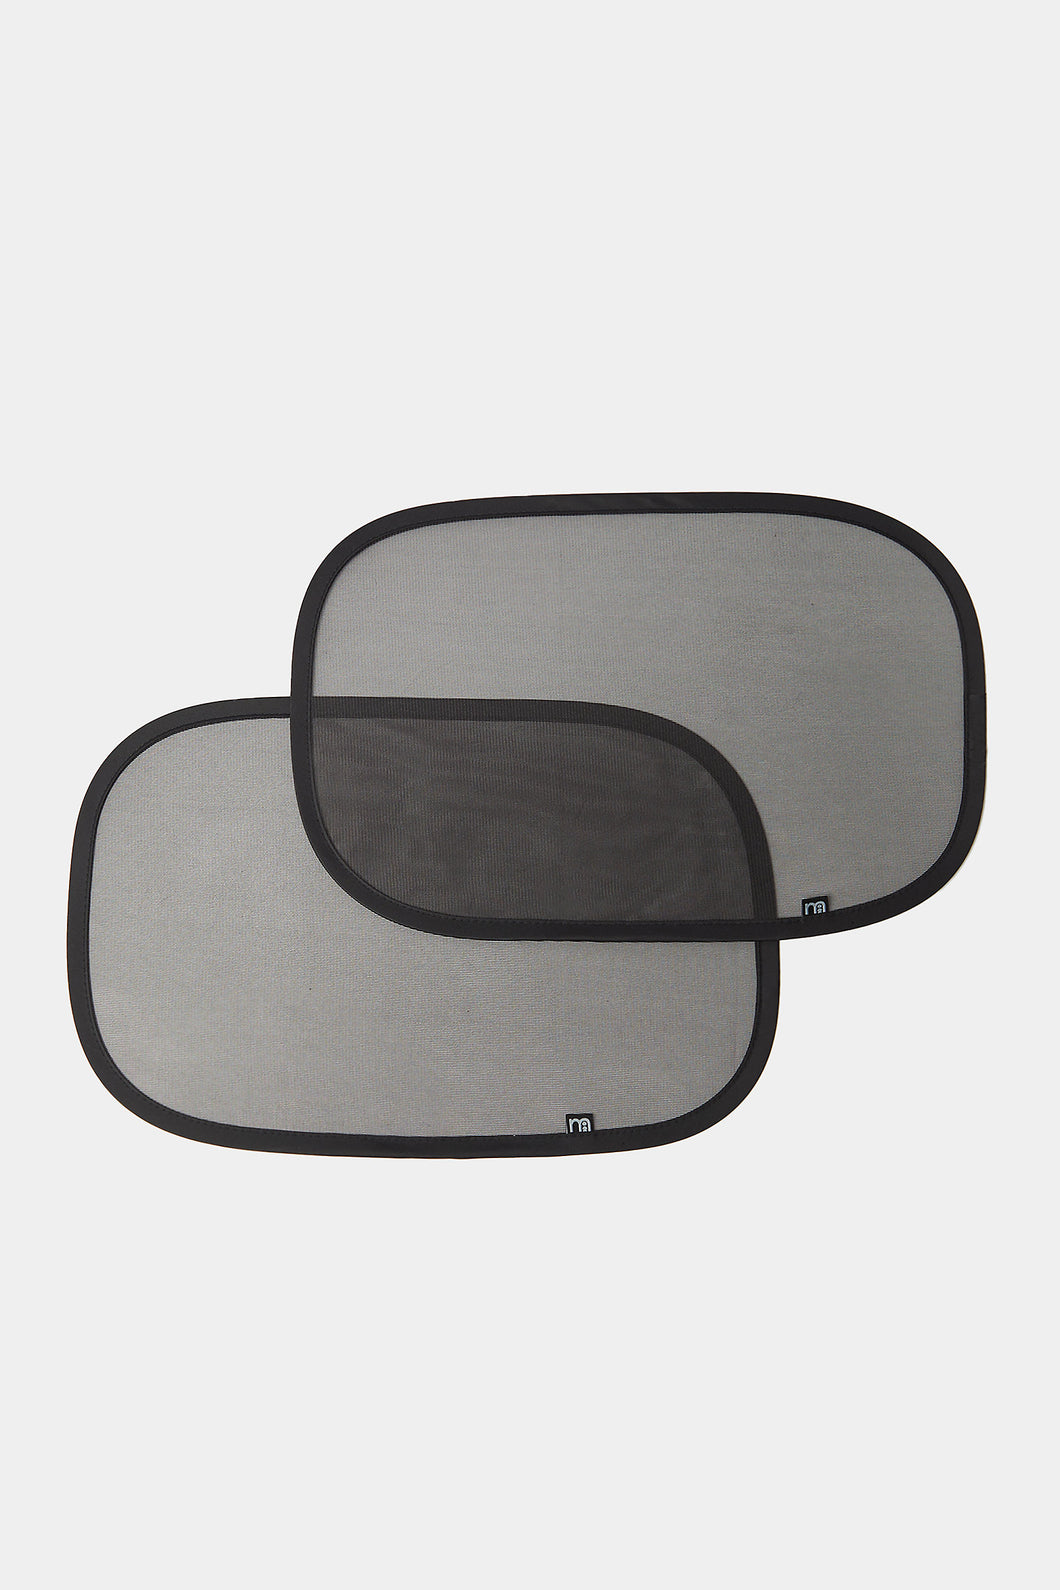 Mothercare Cling Car Sun Shades - 2 Pack